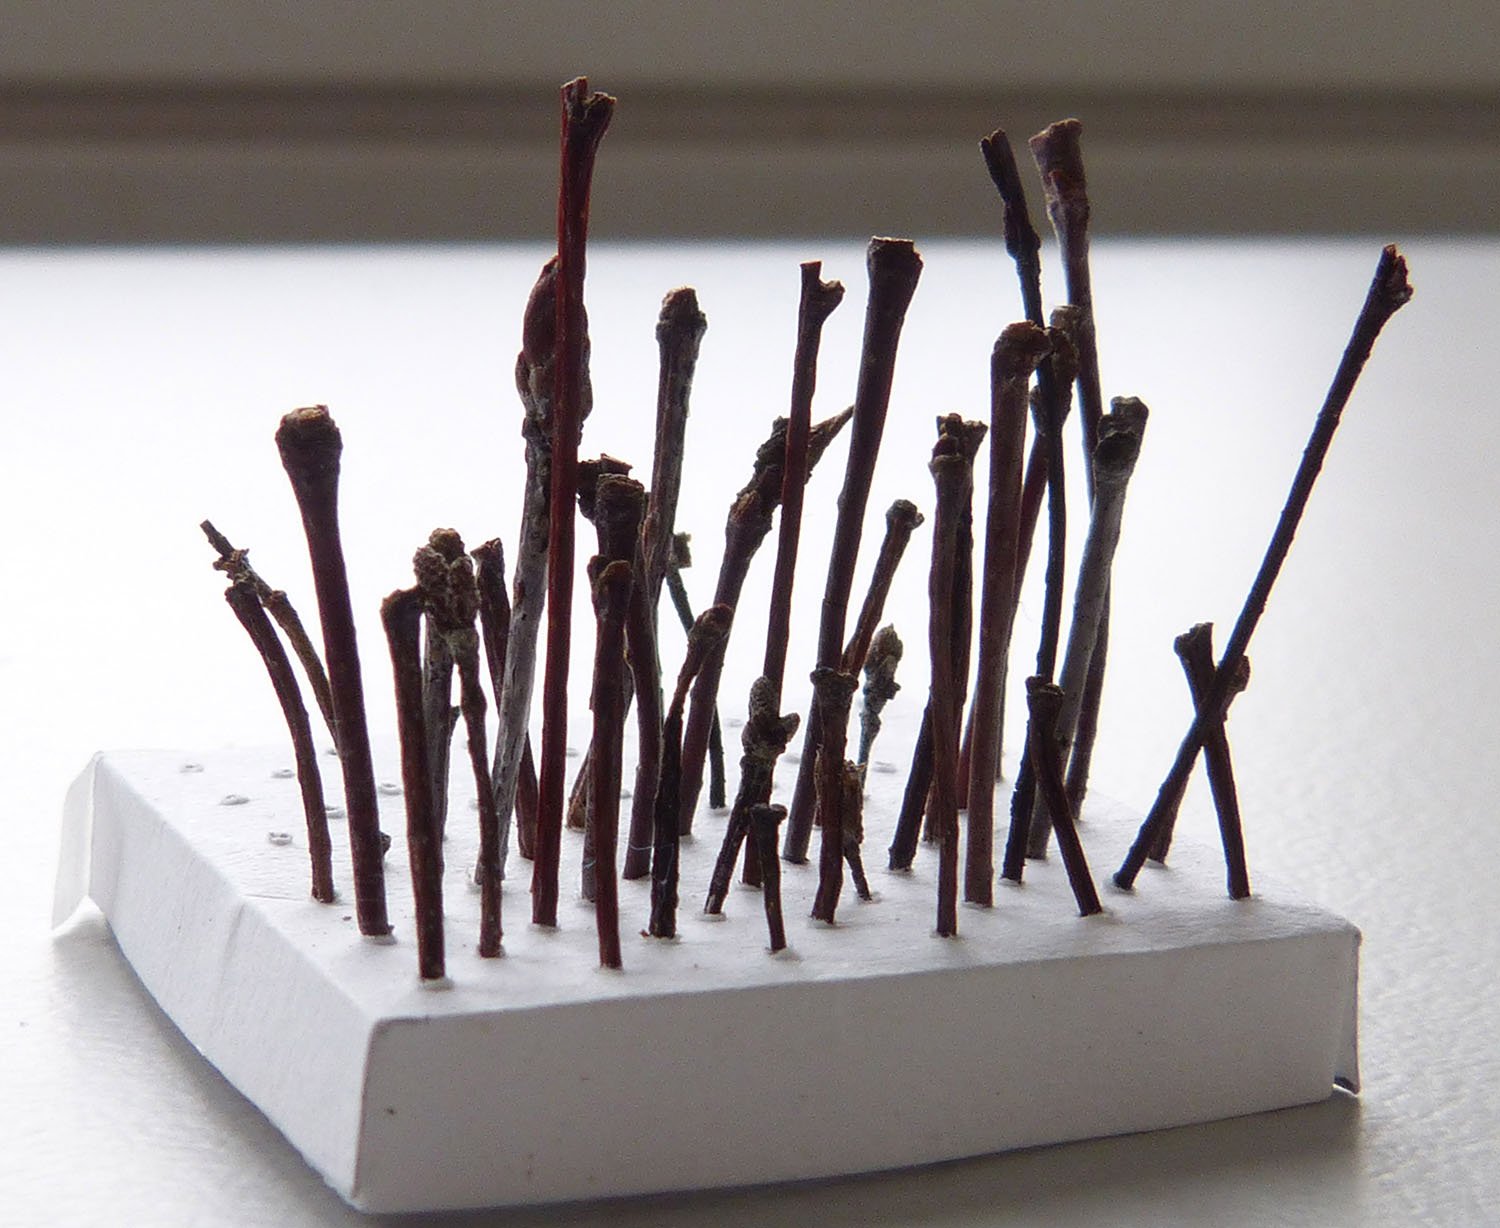 Sculpture_order_and_chaos_mini_trees.jpg